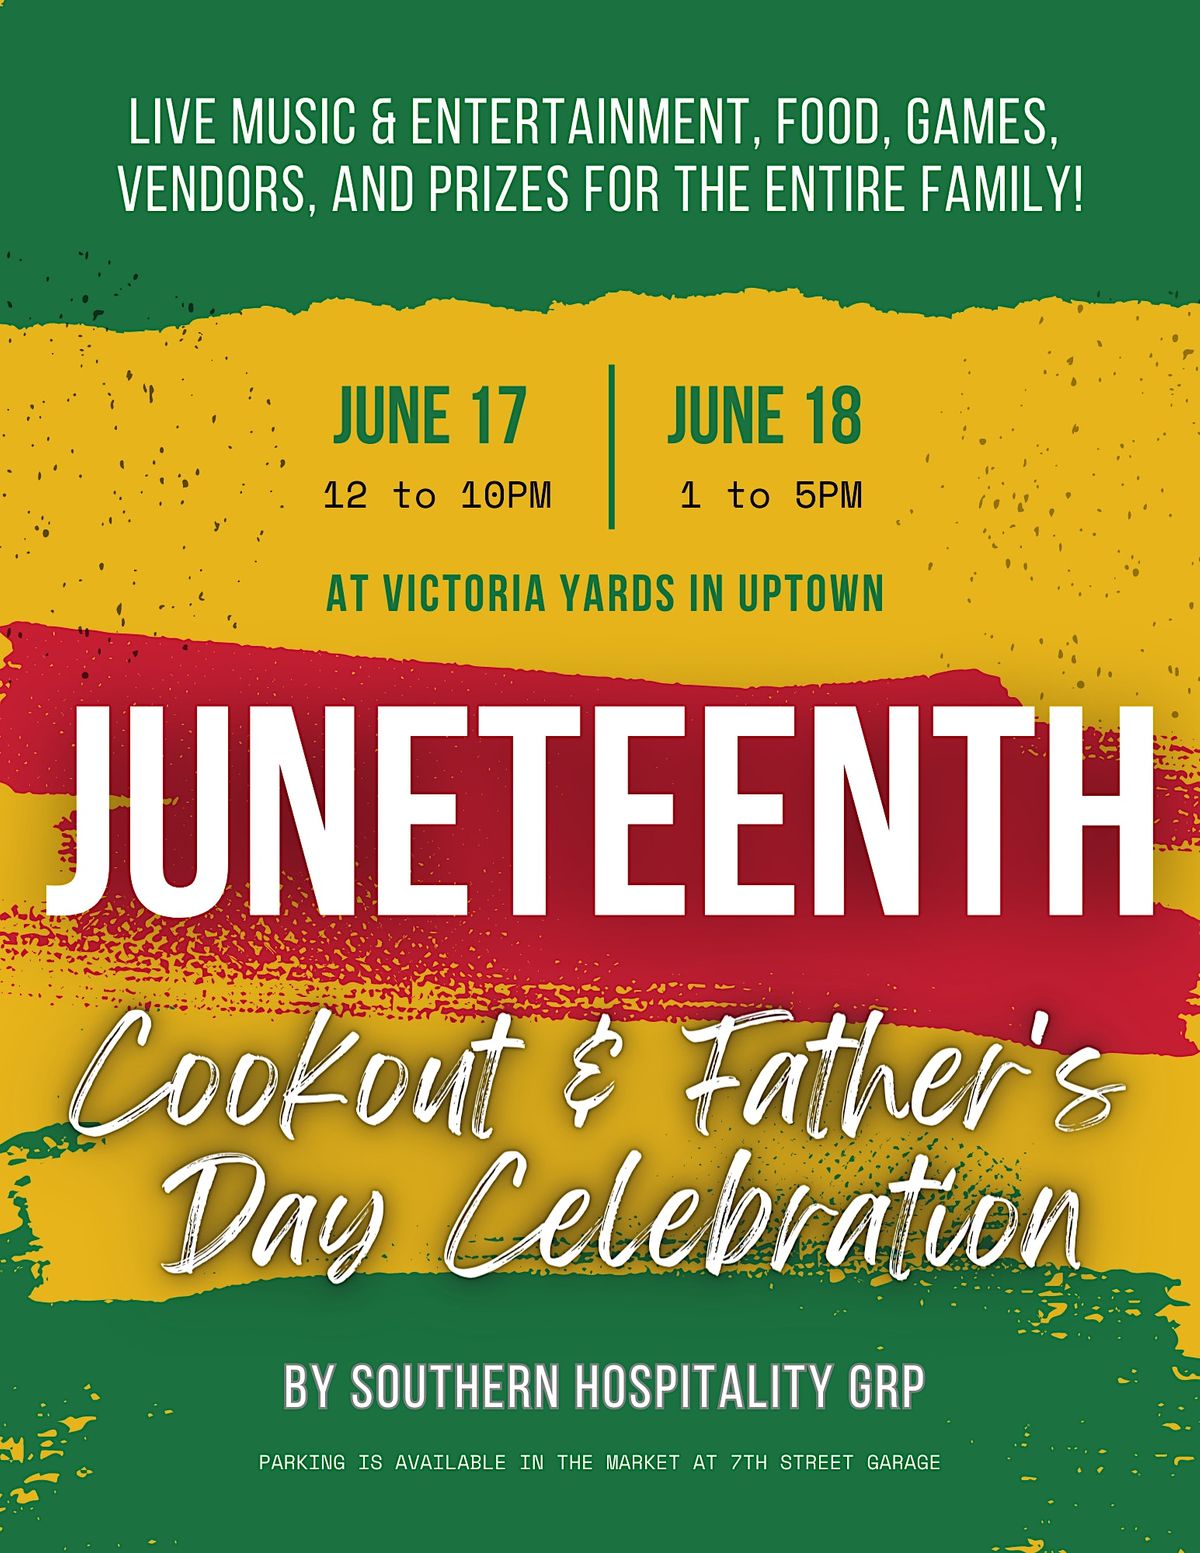 Inaugural Juneteenth Cookout & Father's Day Celebration